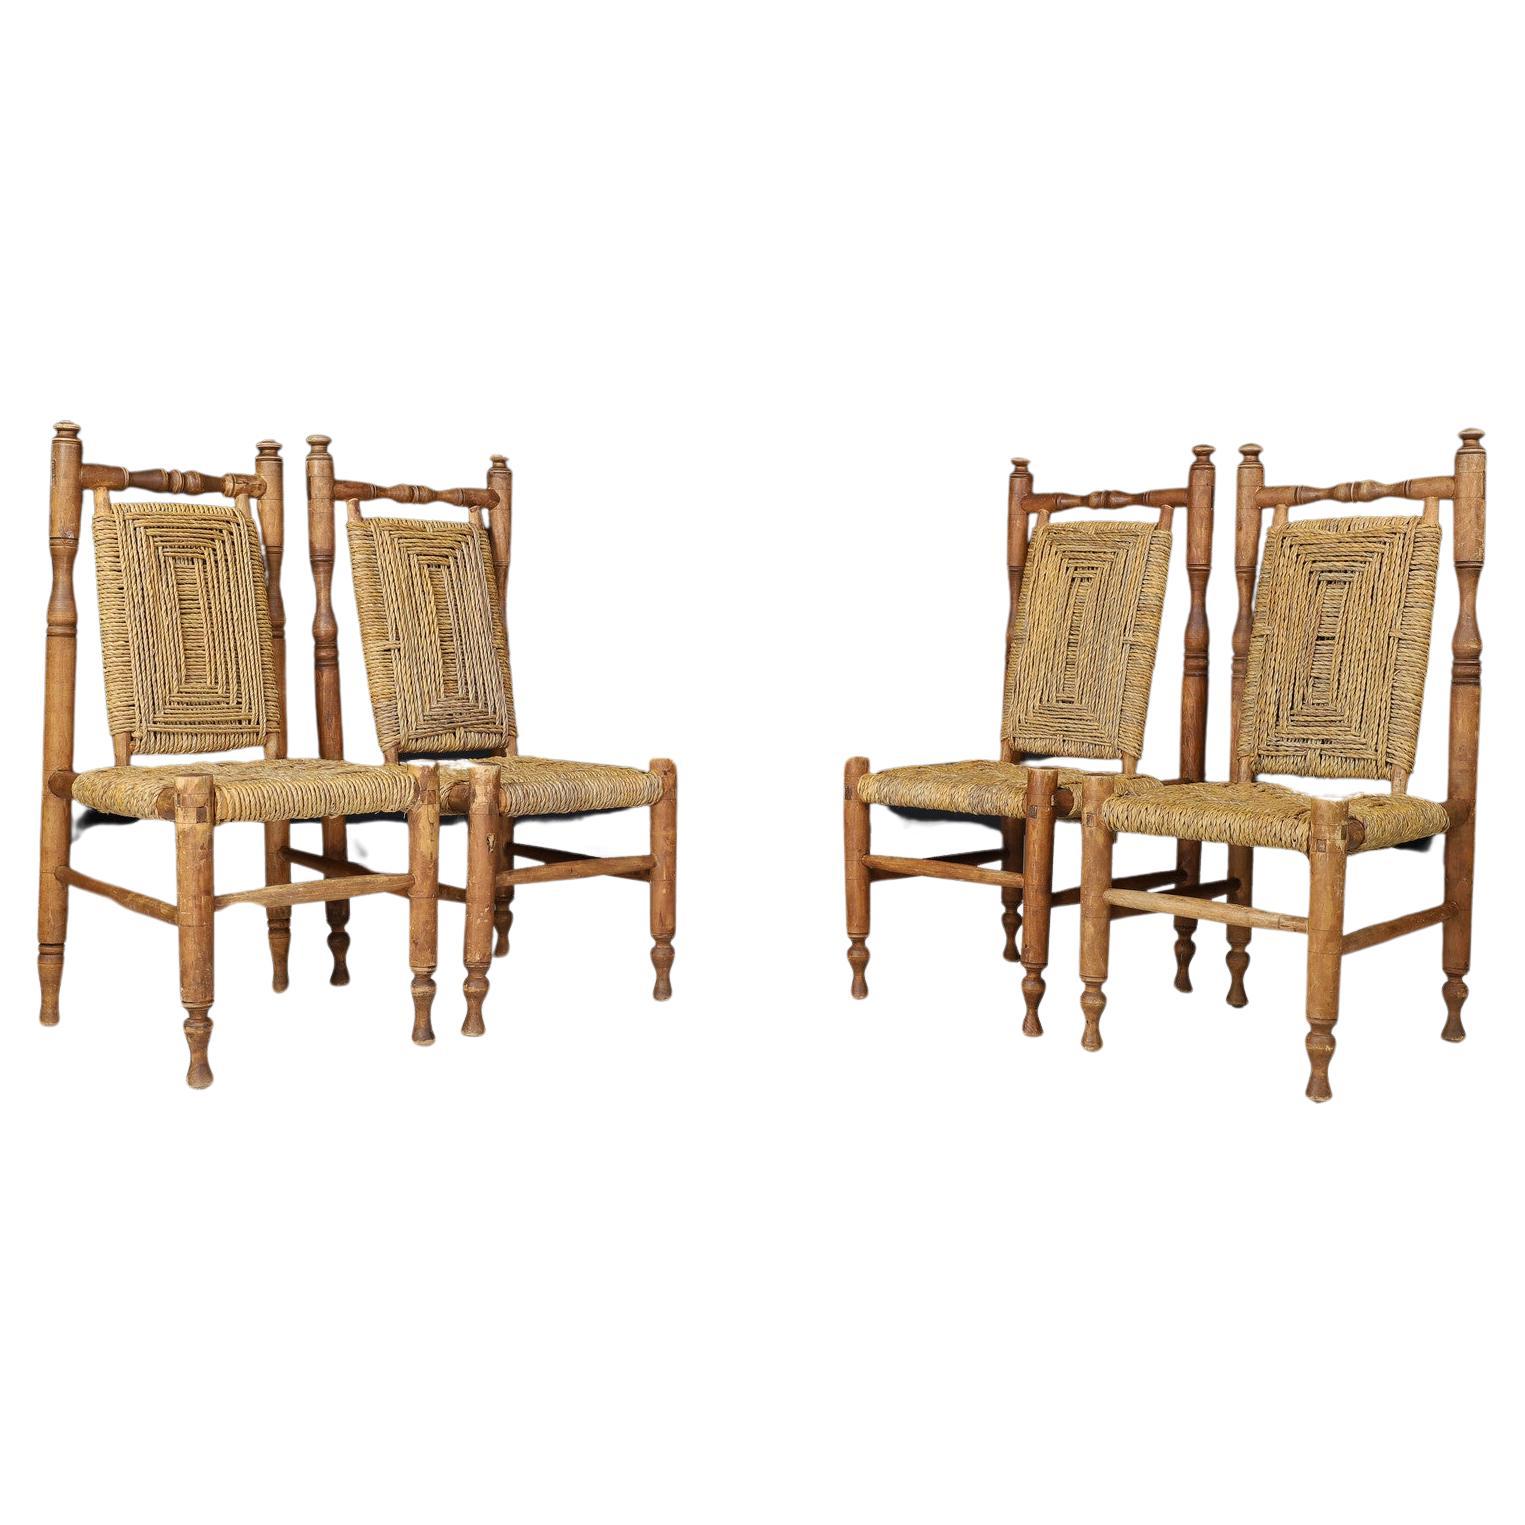 Adrien Audoux and Frida Minet, Set of 8 Mid Century Dining Chairs, circa 1950s In Good Condition For Sale In San Angelo, TX